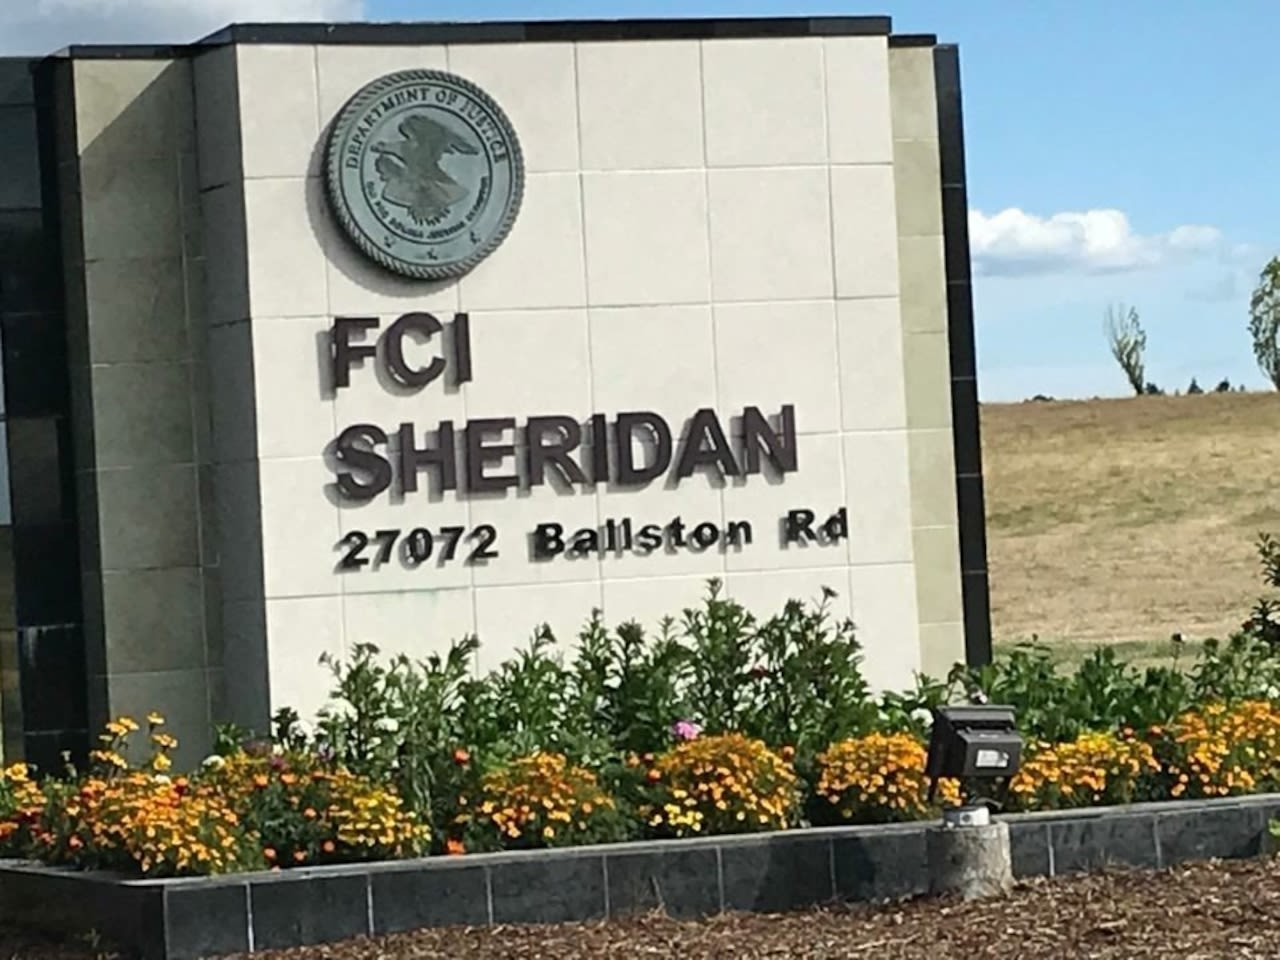 Oregon’s Congressional delegation demands action to address lags in medical care, staff shortages at federal prison in Sheridan